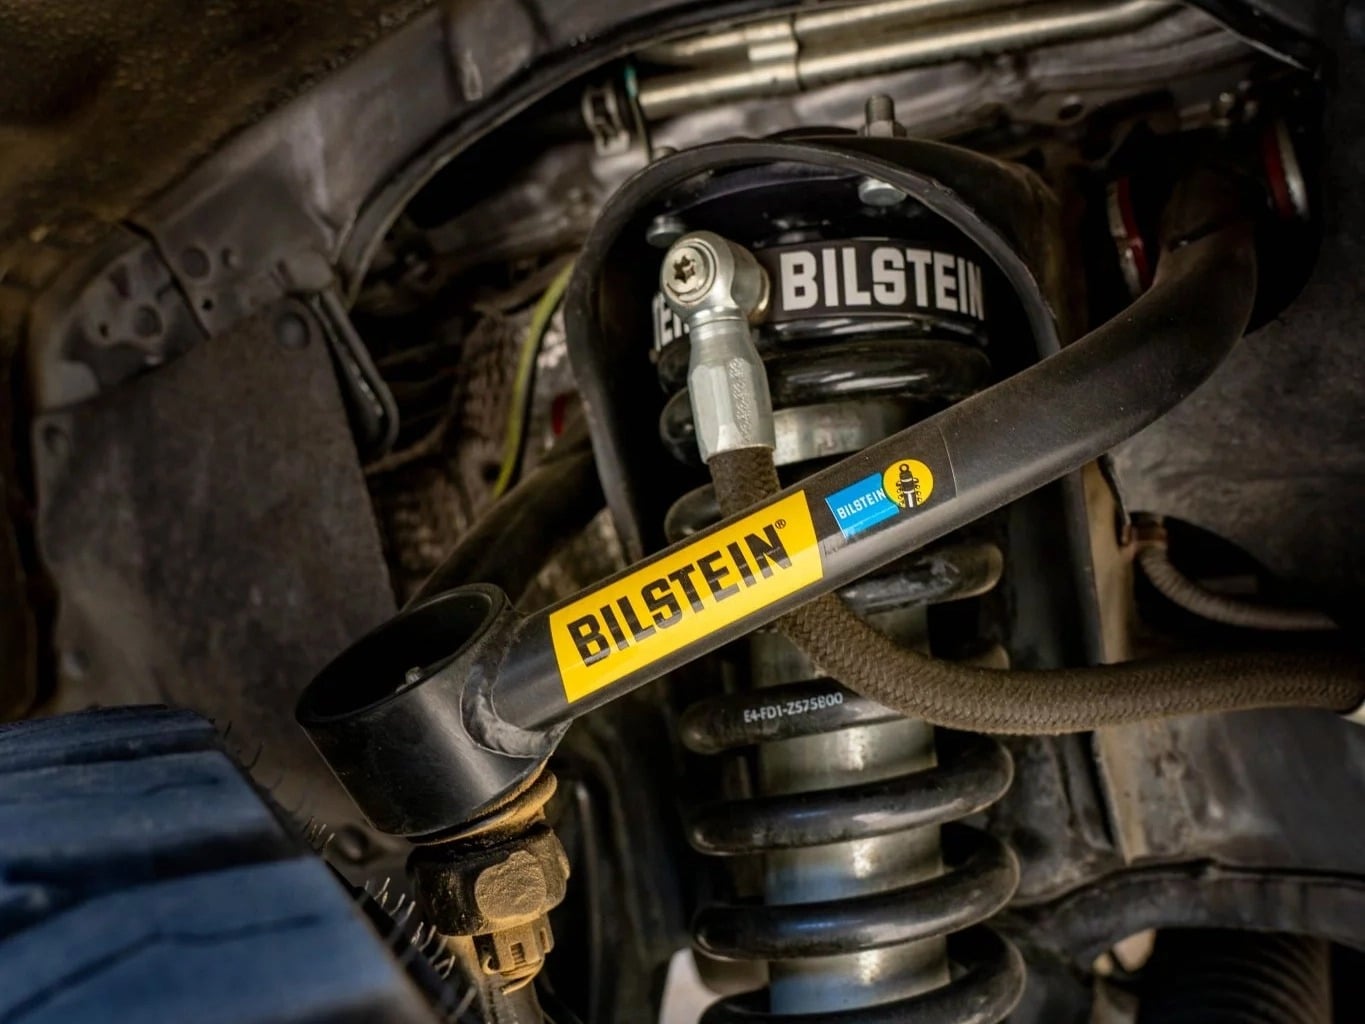 A Blistein control arm installed on a truck.